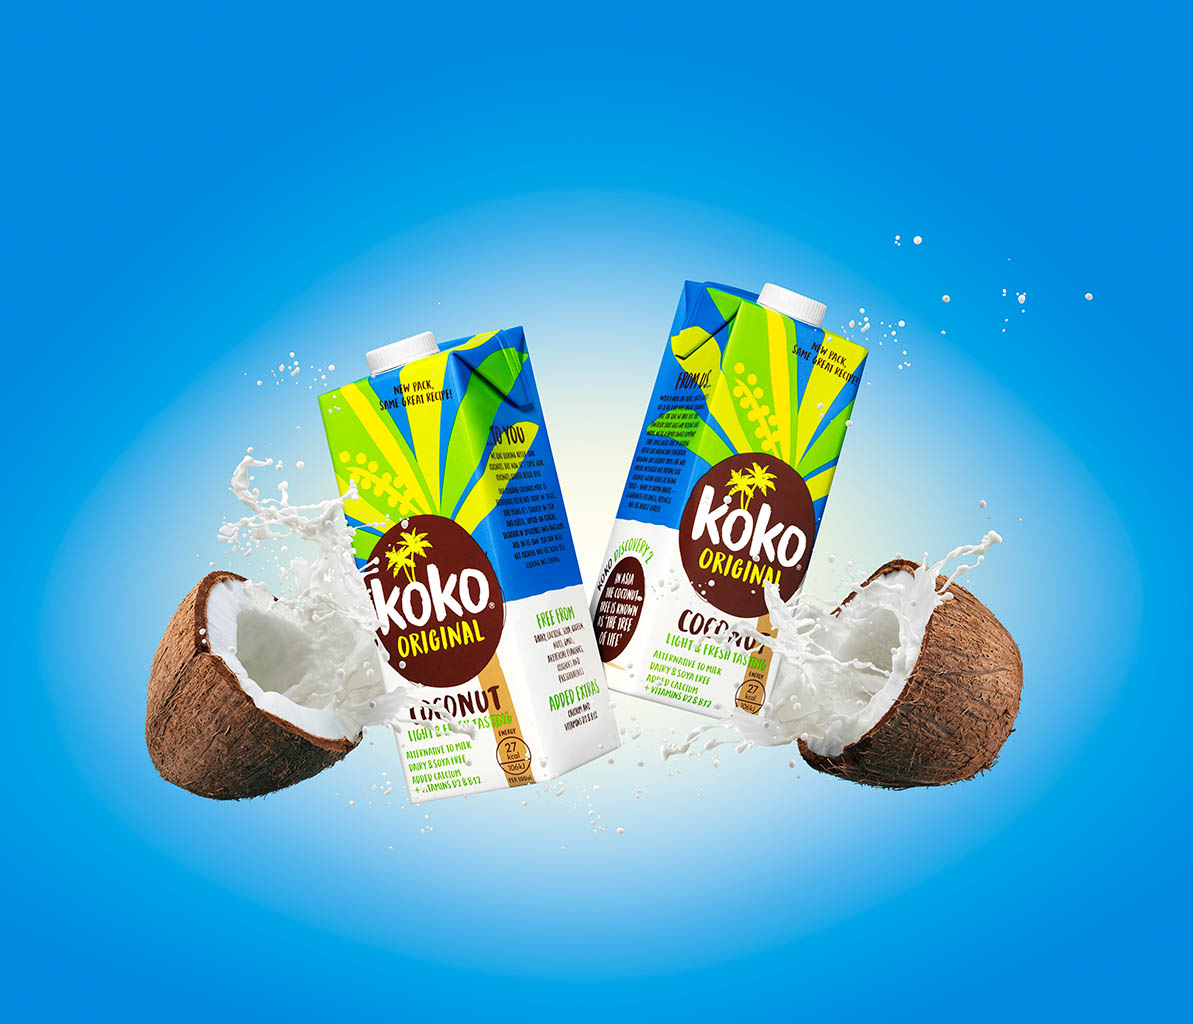 Drinks Photography of Koko milk cartons with smashing coconuts and milk splash by Packshot Factory